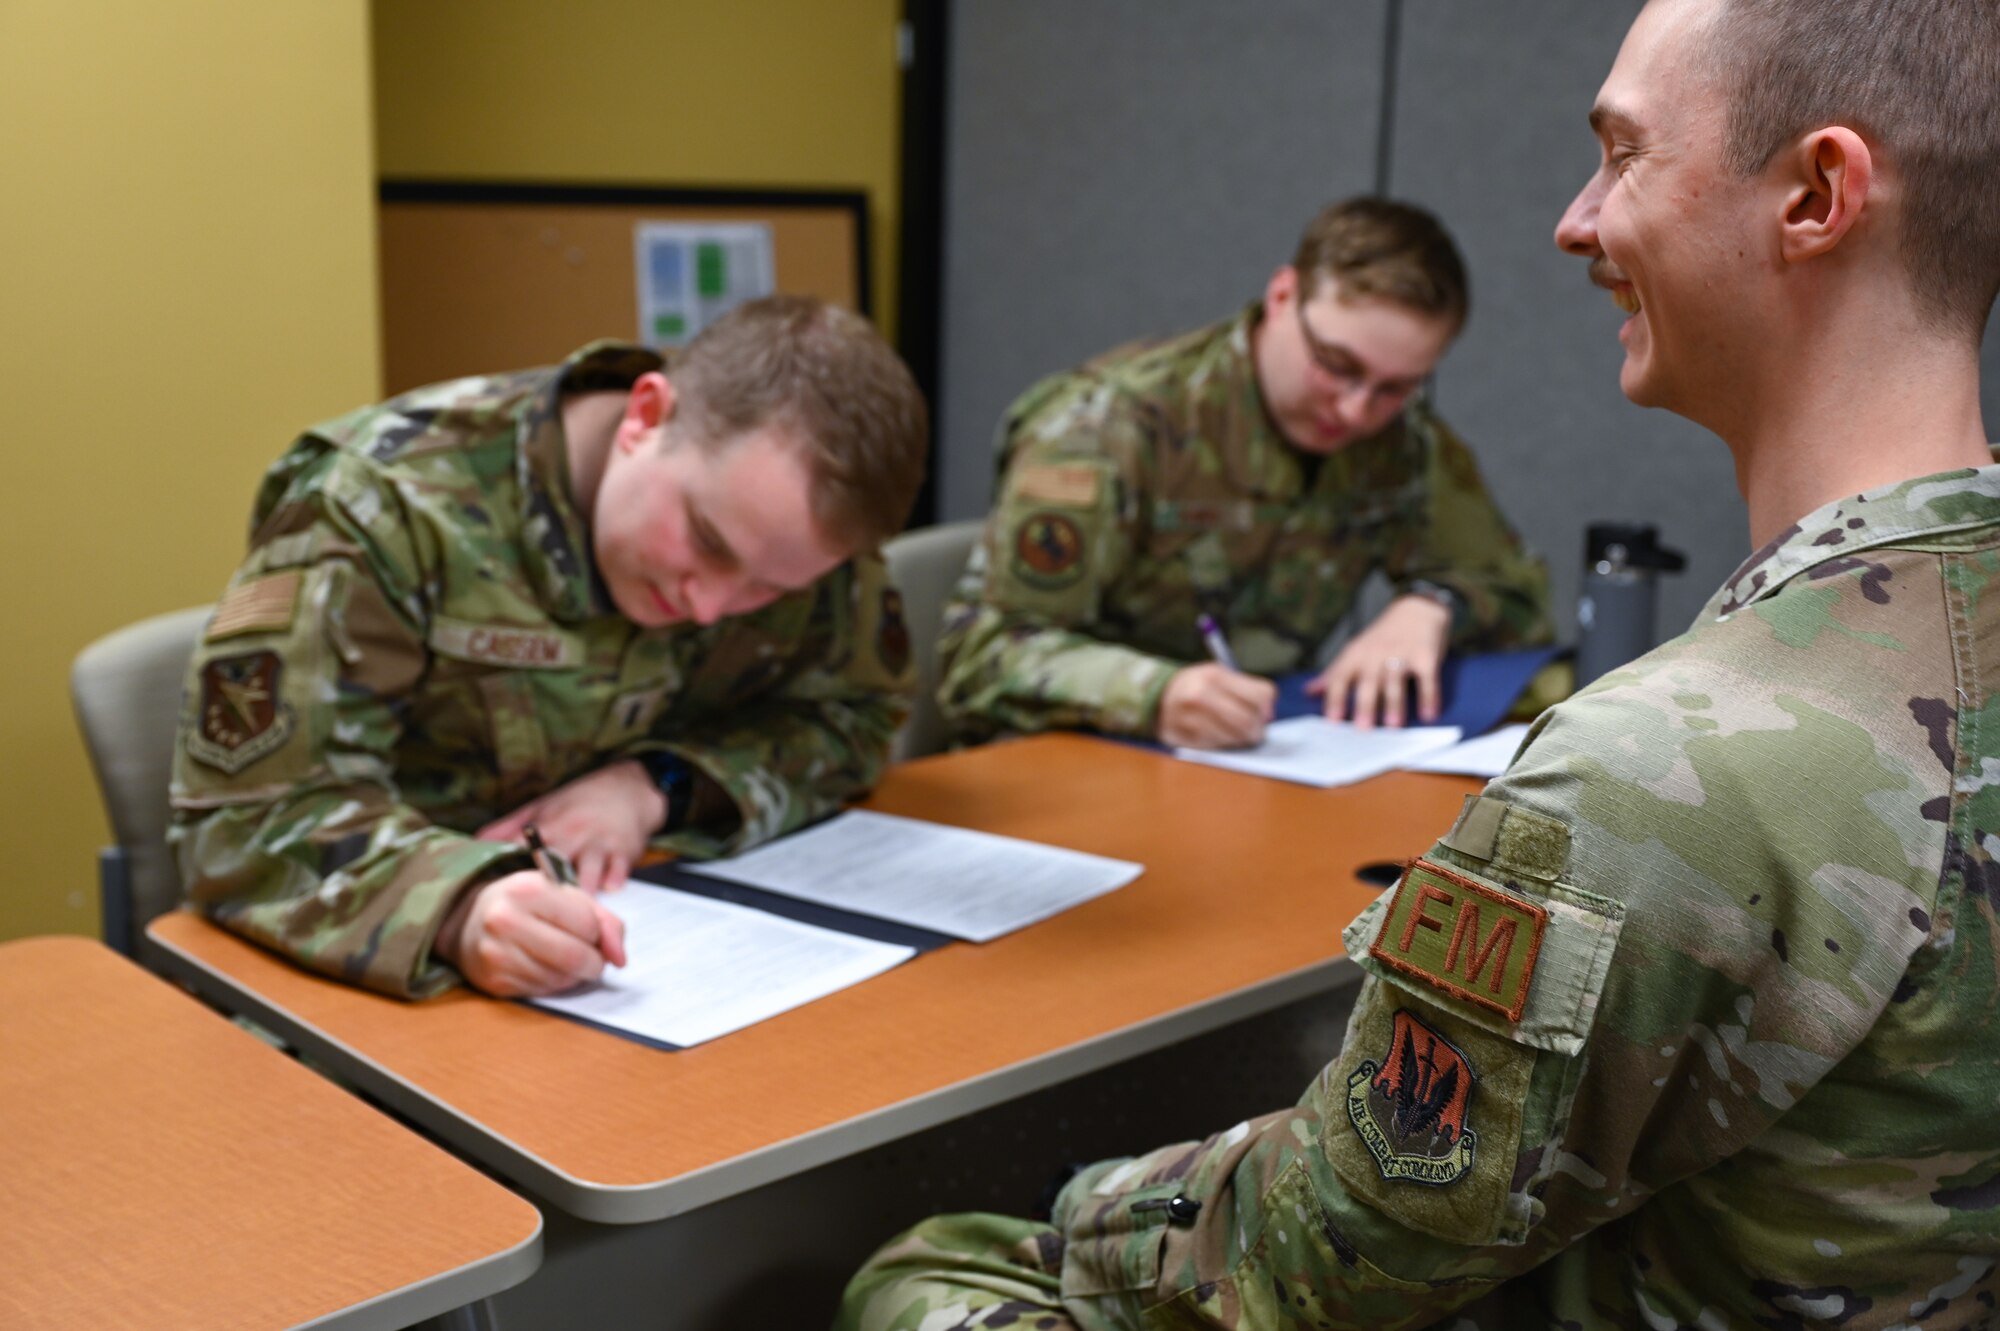 Airmen writing down information in front of a financial operations technician for in-processing